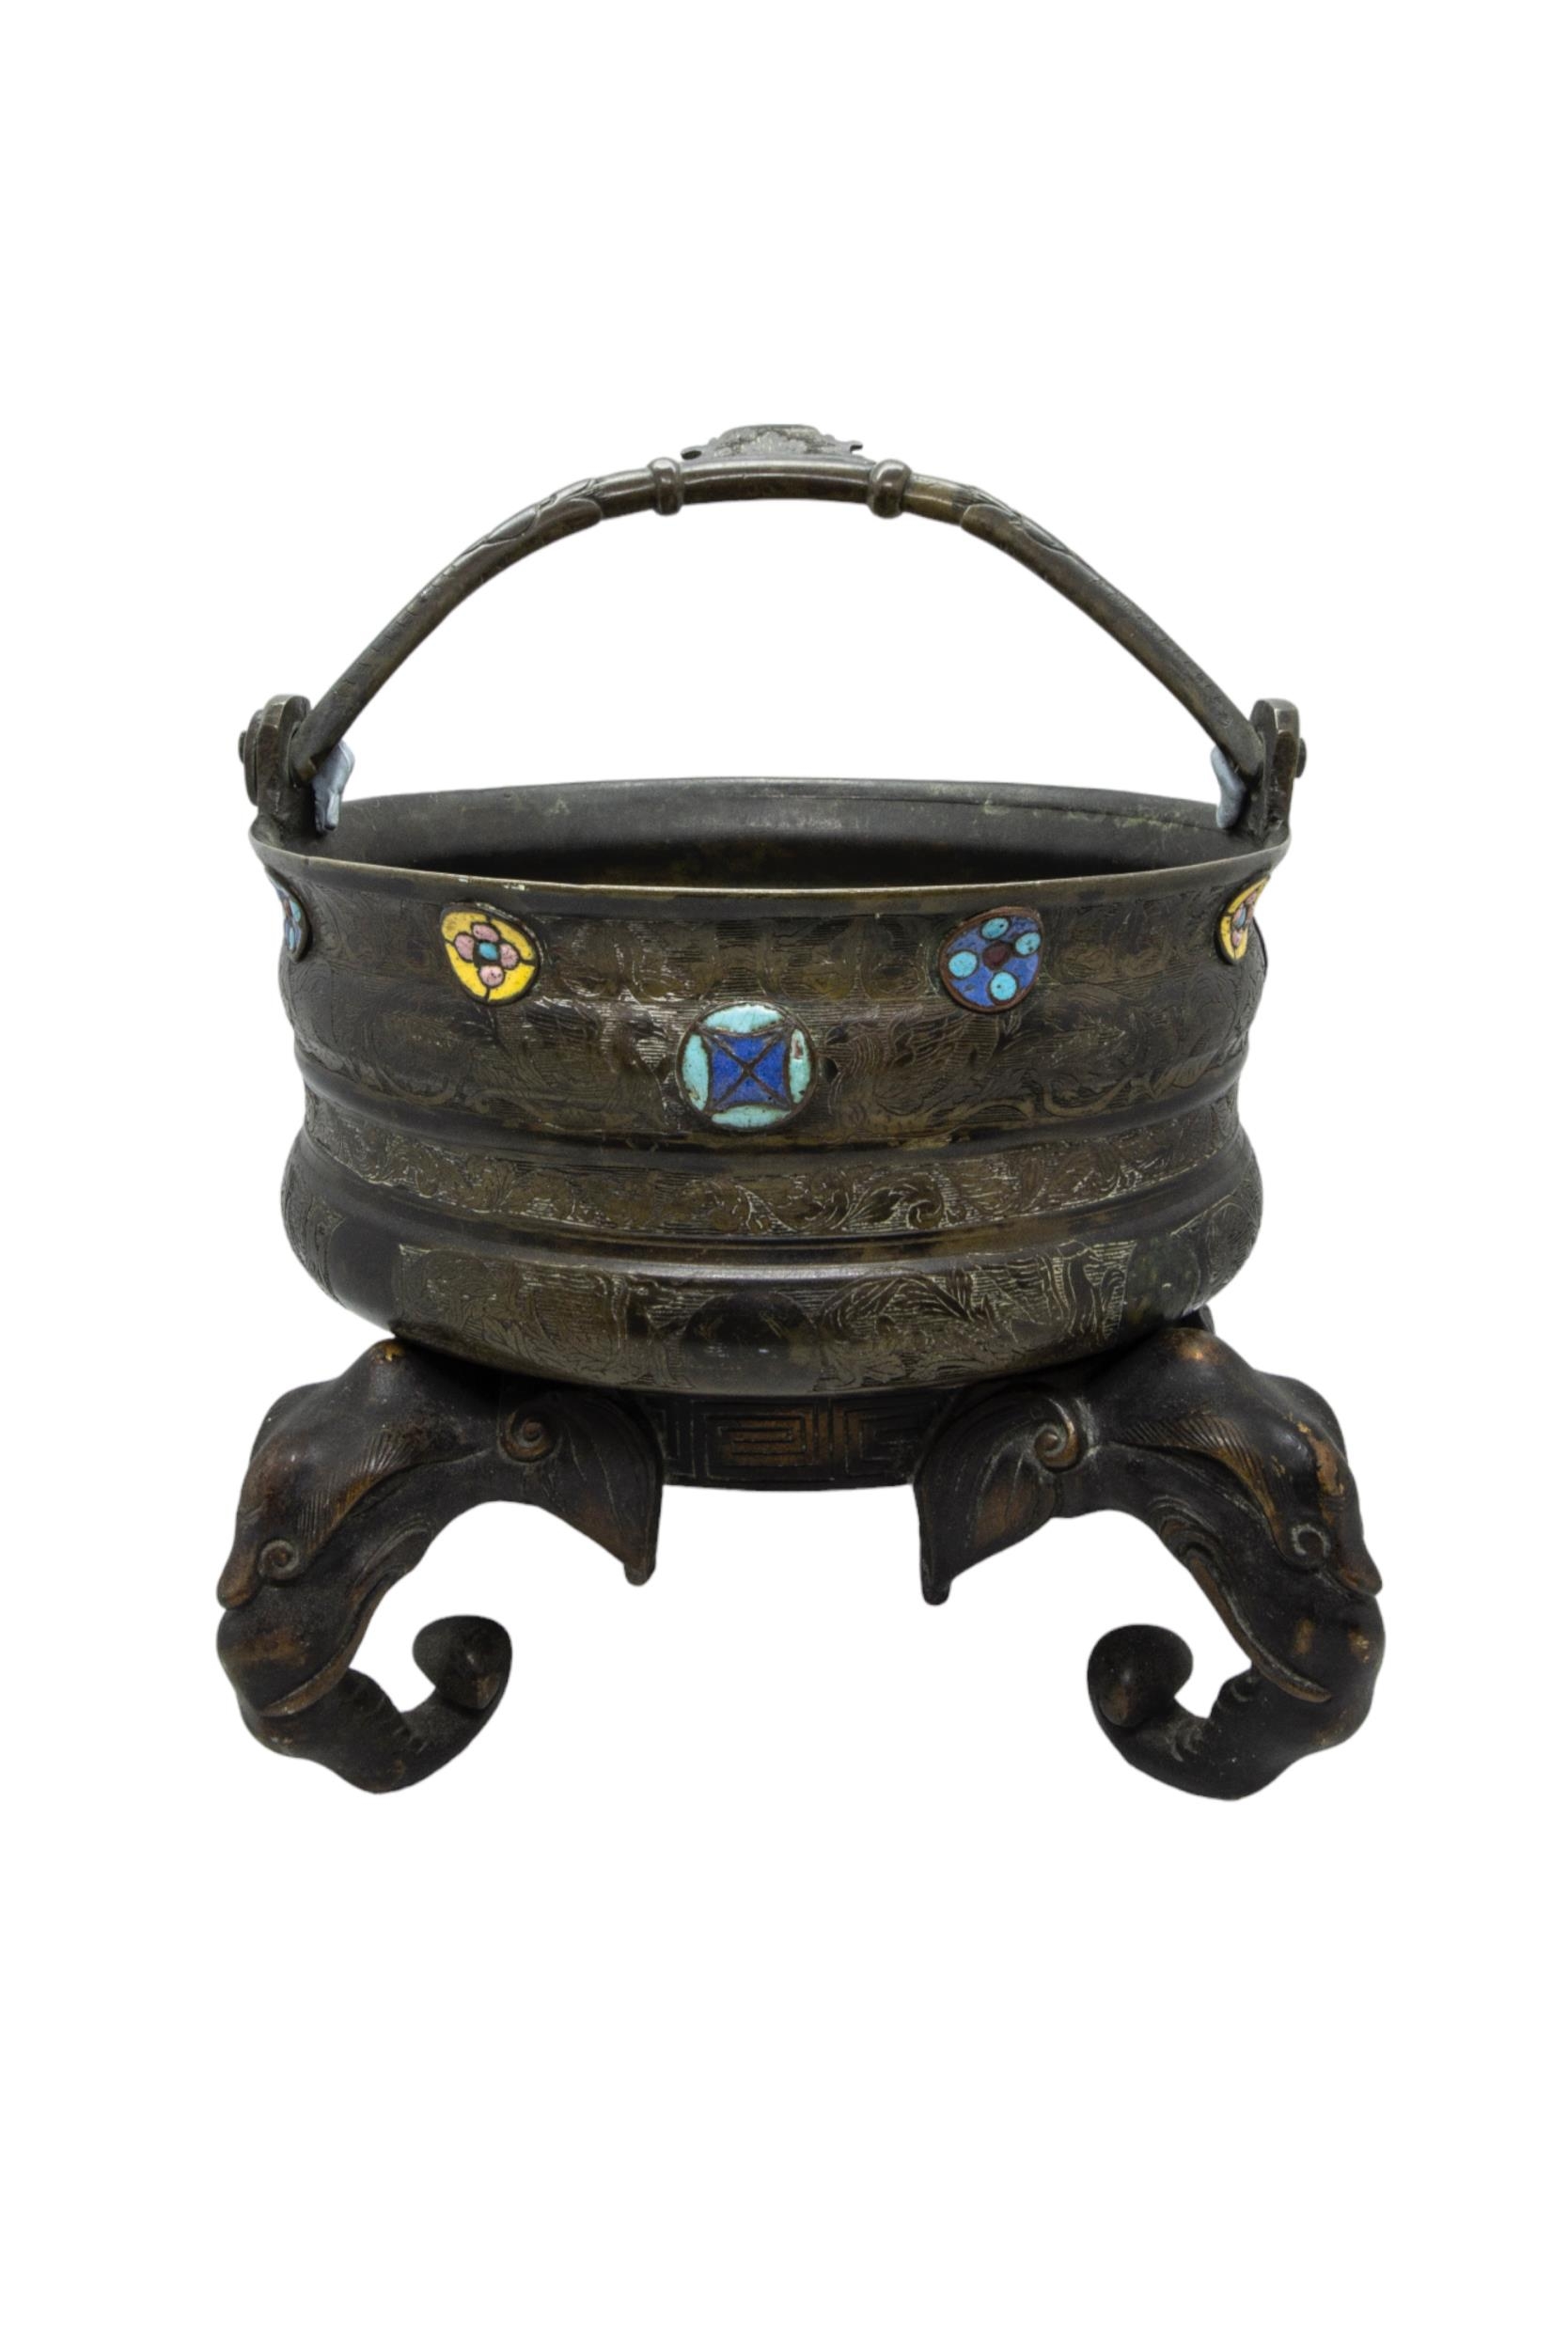 AN INDIAN BRASS PAIL, LATE 19TH / EARLY 20TH CENTURY, profuse chased decoration with enamelled